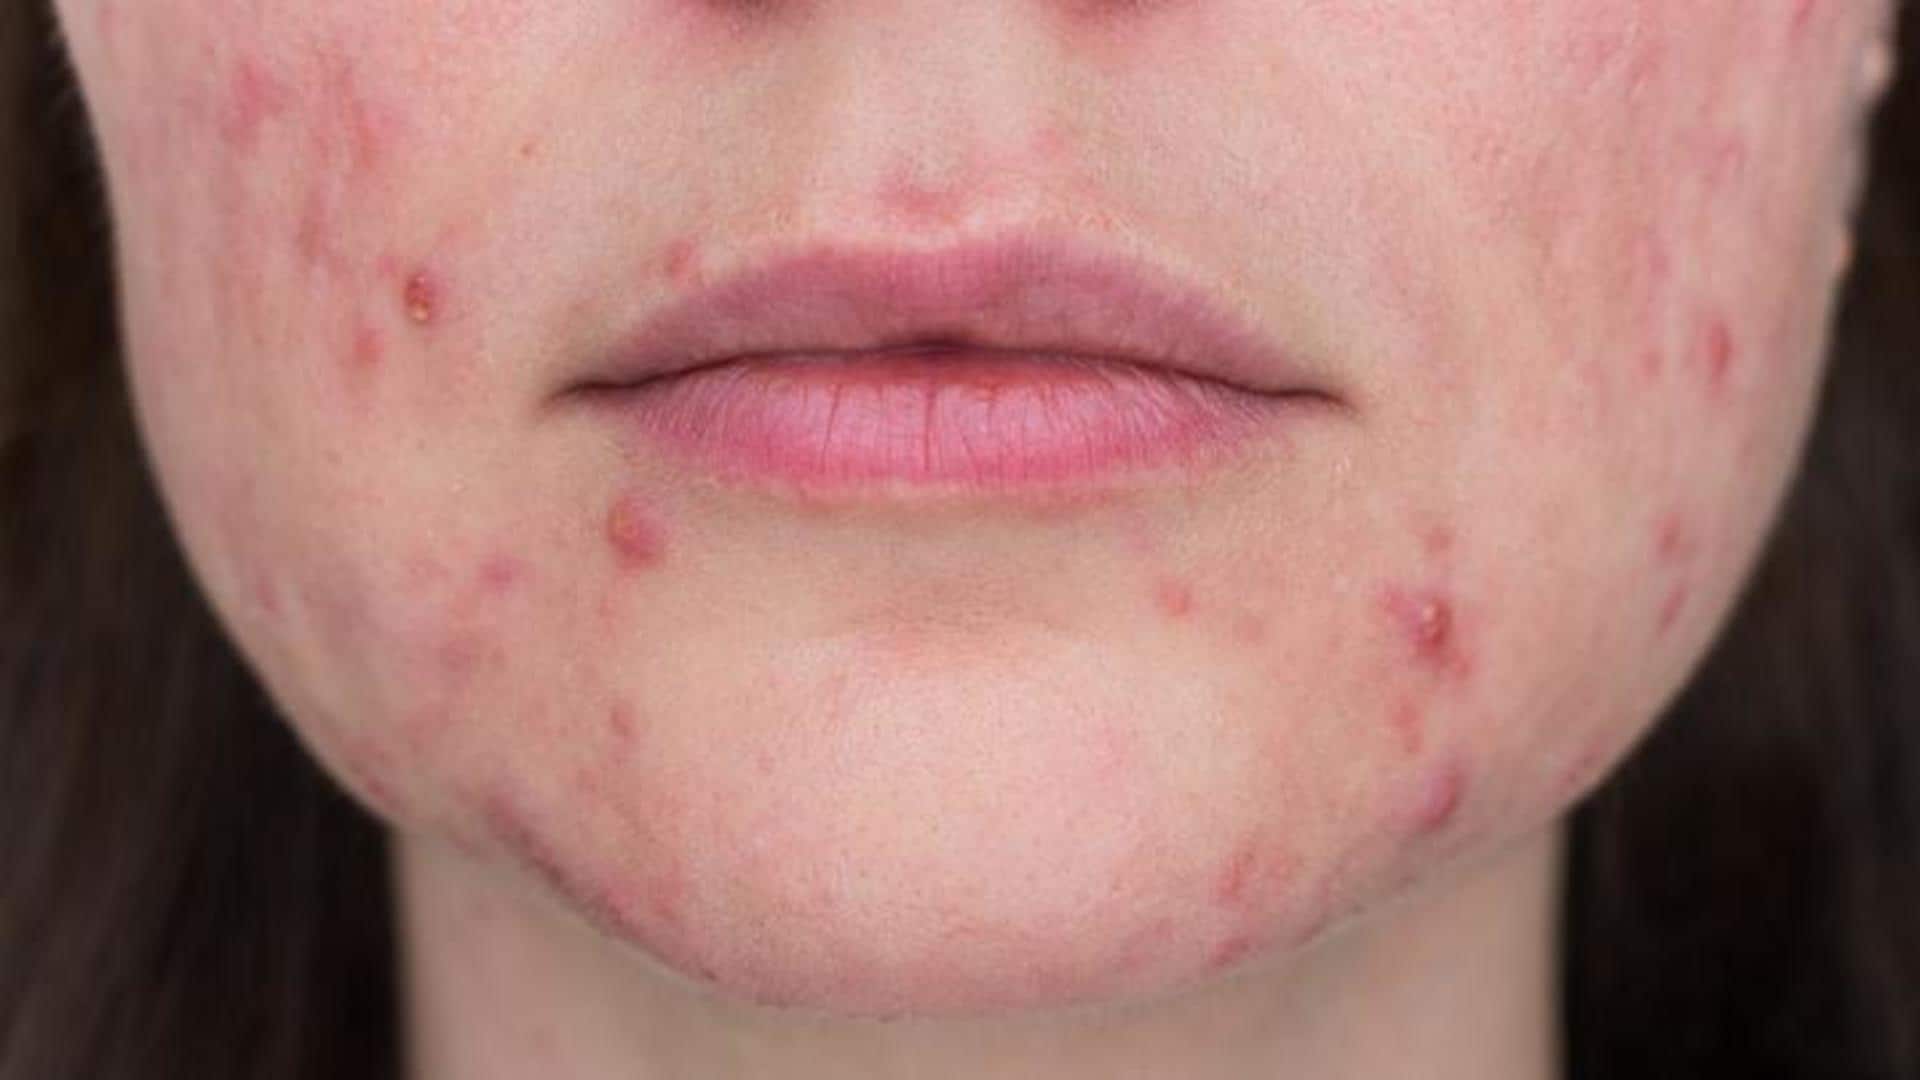 Papulopustular rosacea: Causes, symptoms, and prevention 